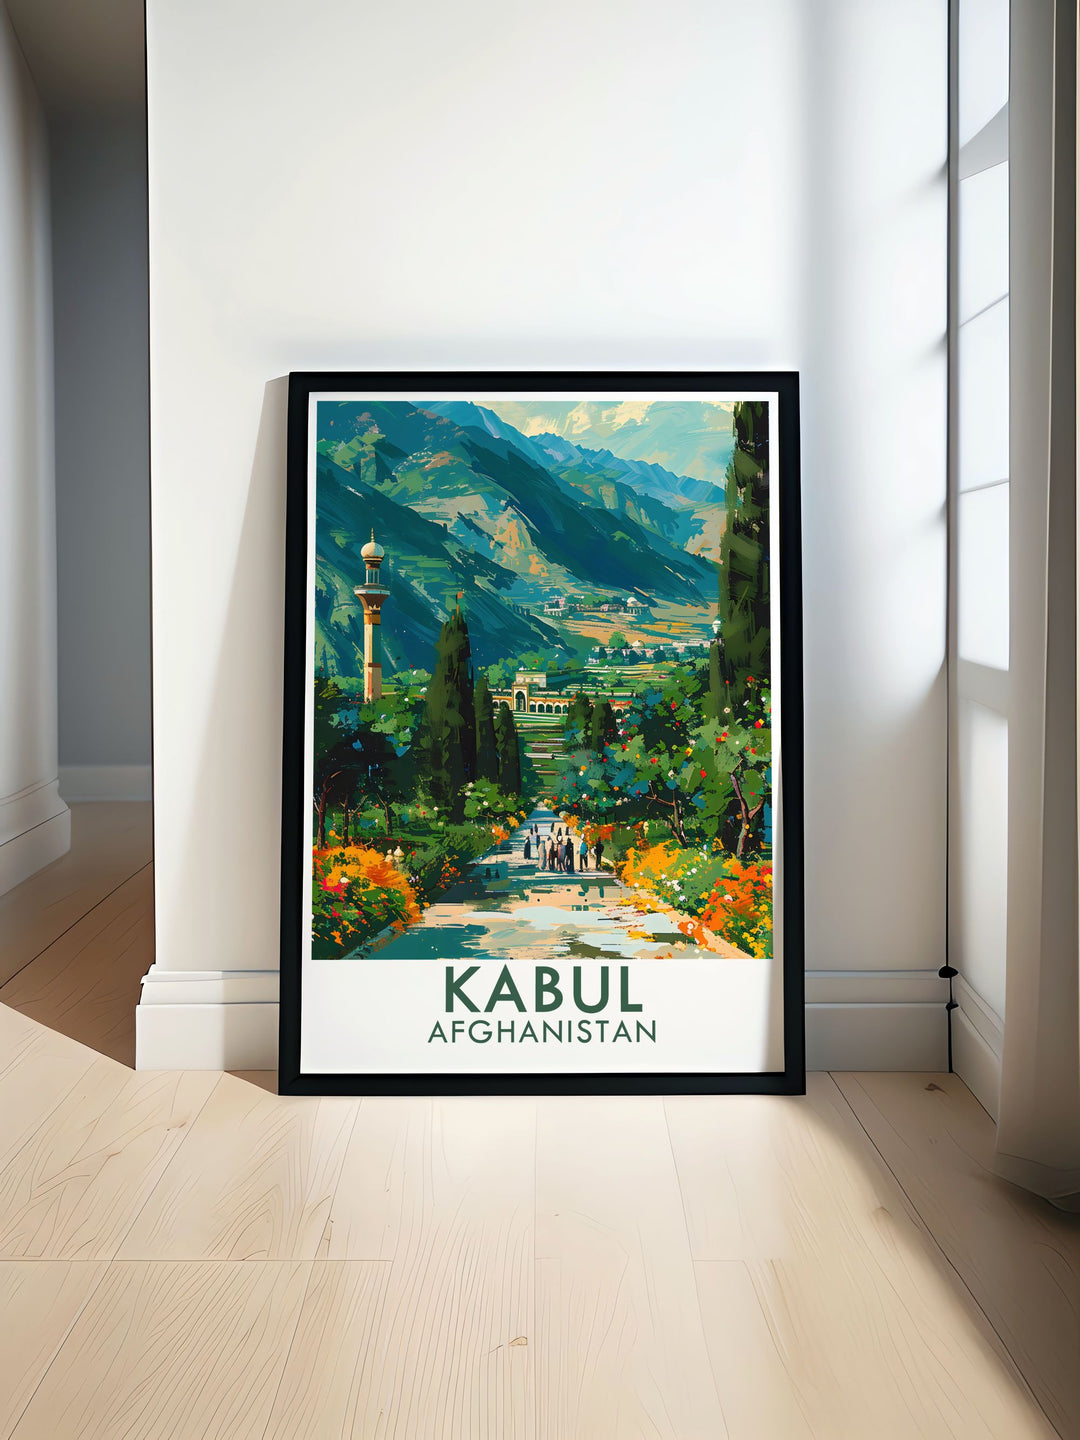 Featuring the lush greenery and peaceful pathways of Baburs Garden, this travel poster brings the beauty of one of Afghanistans most cherished landmarks into your home. The vibrant colors and detailed illustrations make it a standout piece for any room.